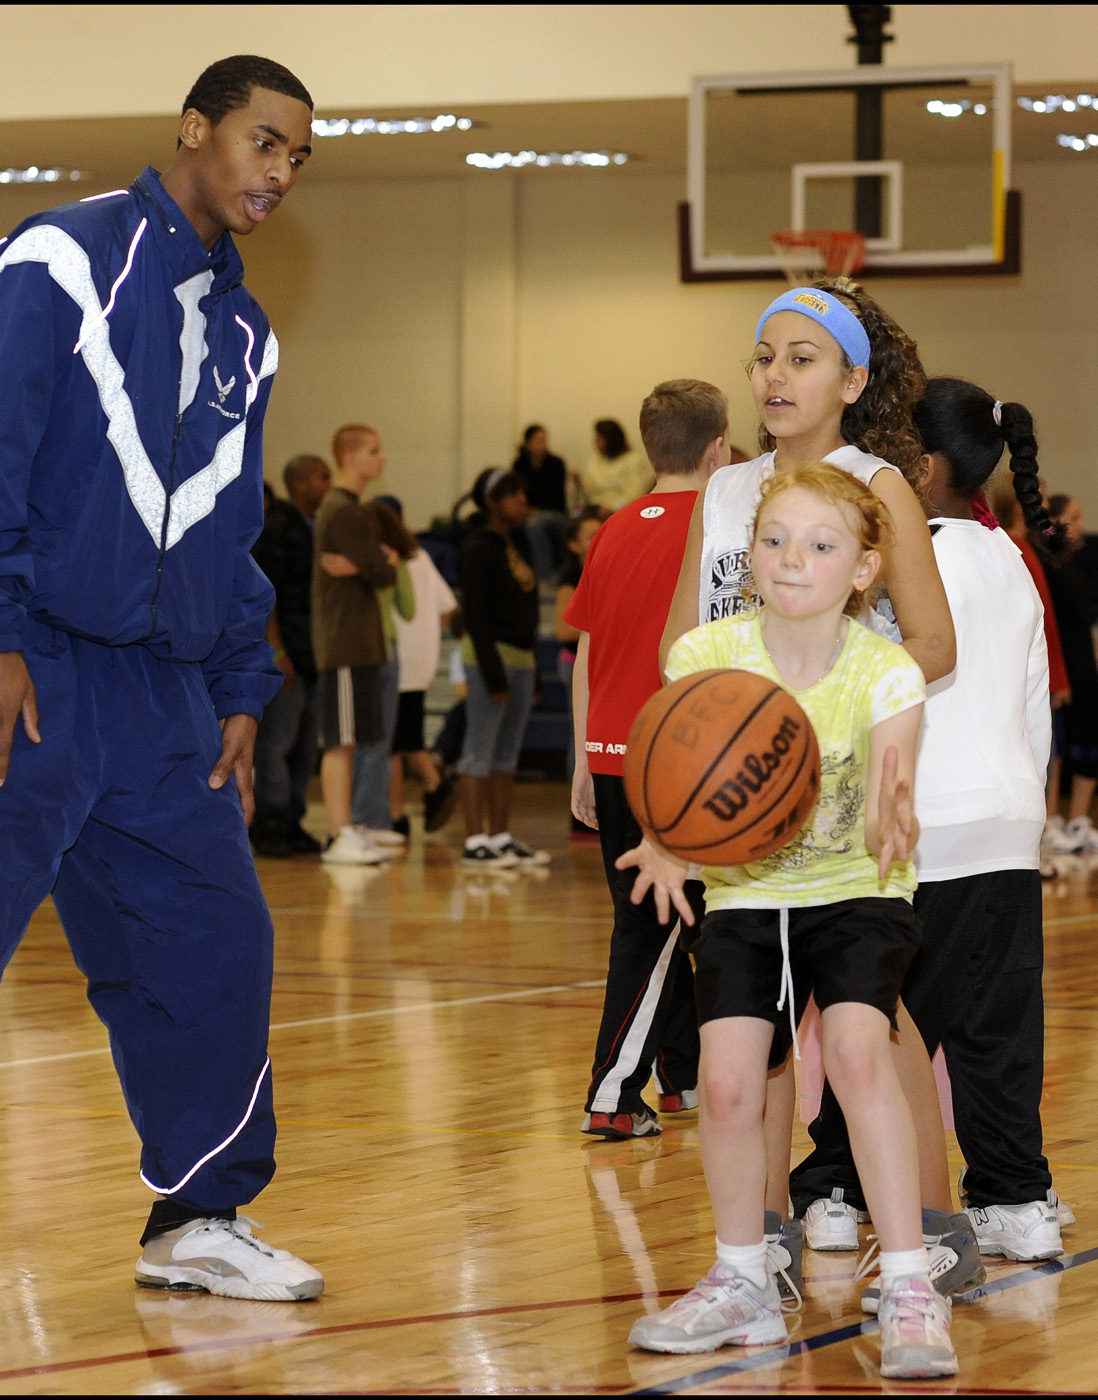 Larger than life -- Shaq shares hoops clinic with Buckley's children > Air  Force Space Command (Archived) > Article Display